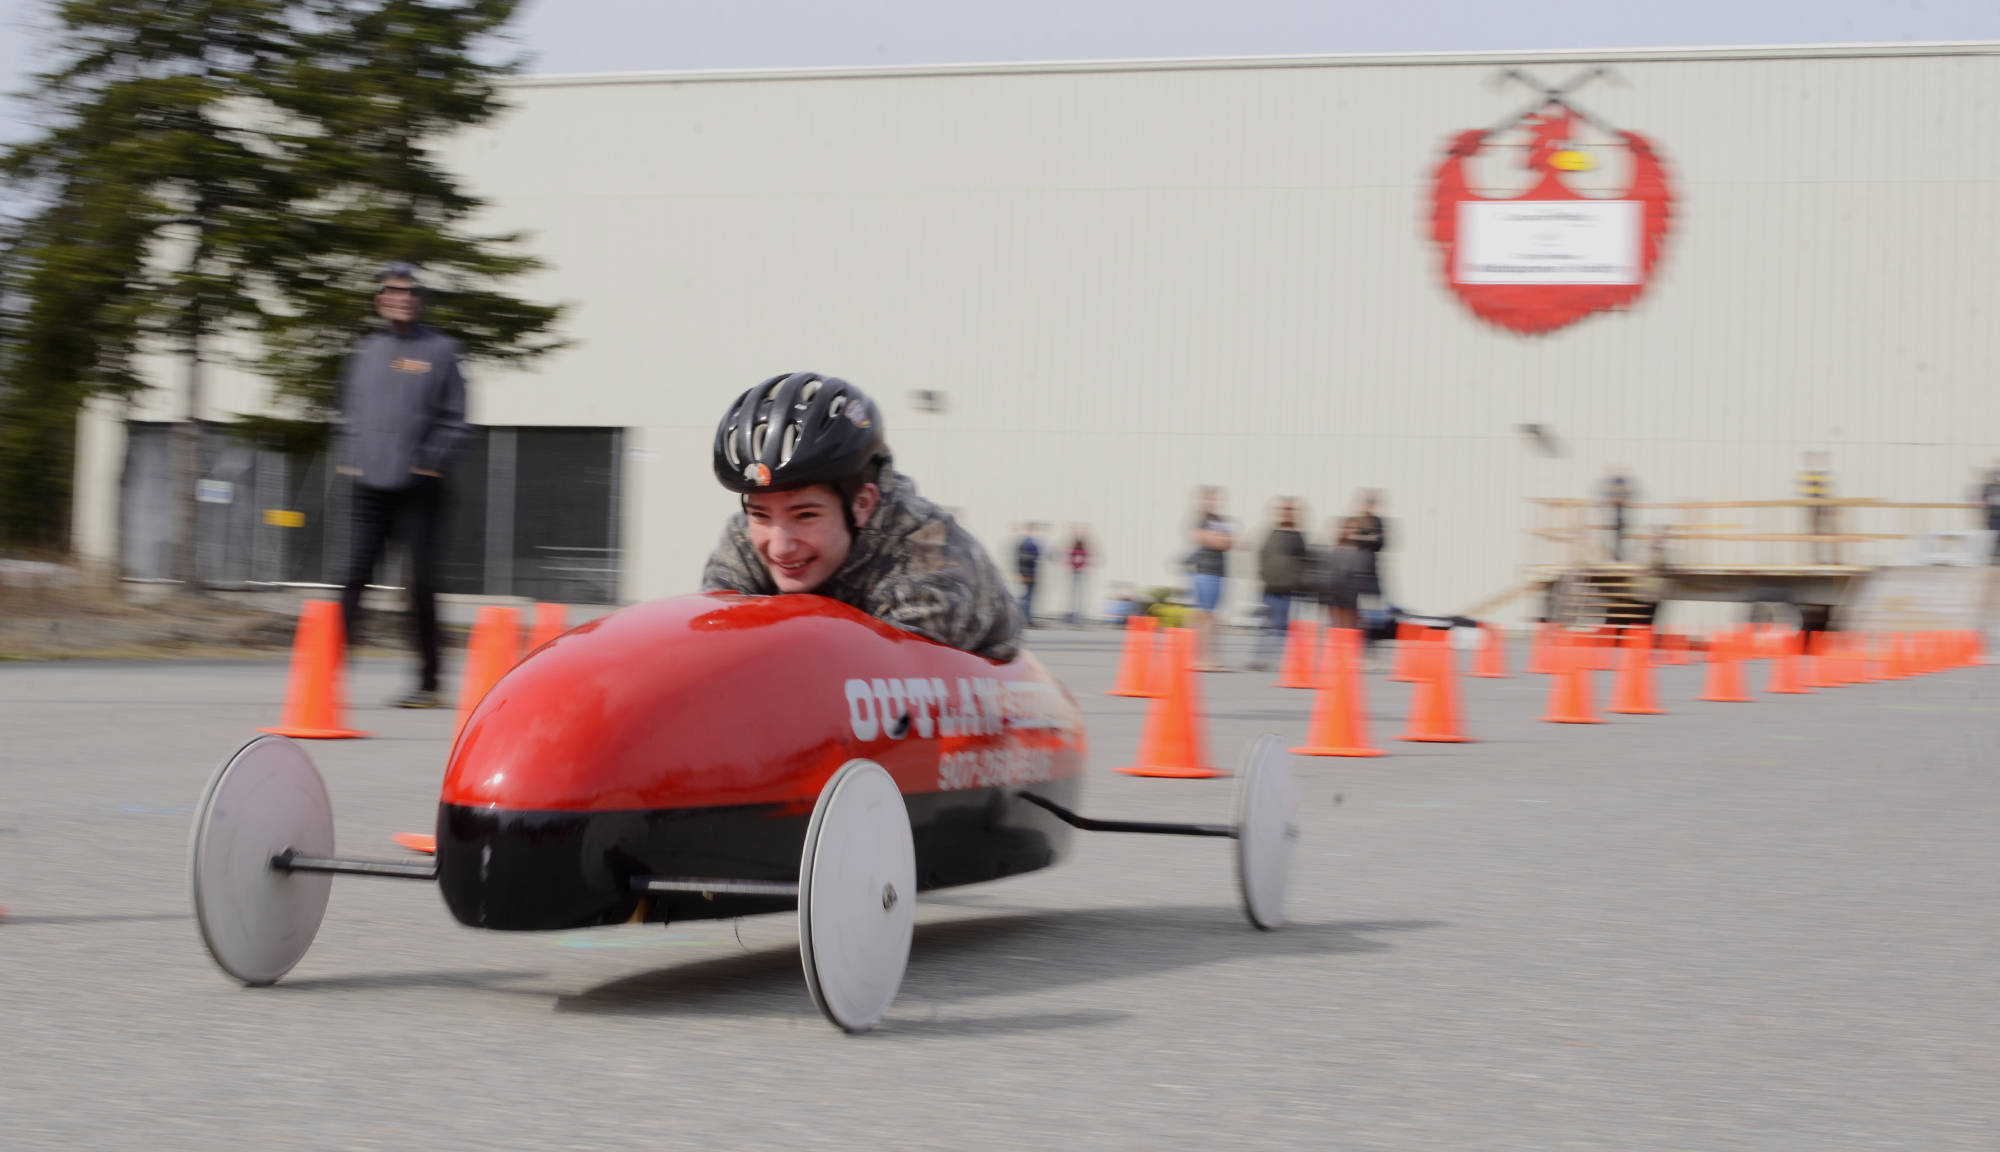 Alexander Van De Grift races in the Kenai Rotary Club’s 12th anual Soapbox Derby on Saturday, May 12, 2018 at the Challenger Learning Center in Kenai, Alaska. Van De Grift won a craftsmanship trophy for his car, which was sponsored by Outlaw Body and Paint. (Ben Boettger/Peninsula Clarion).